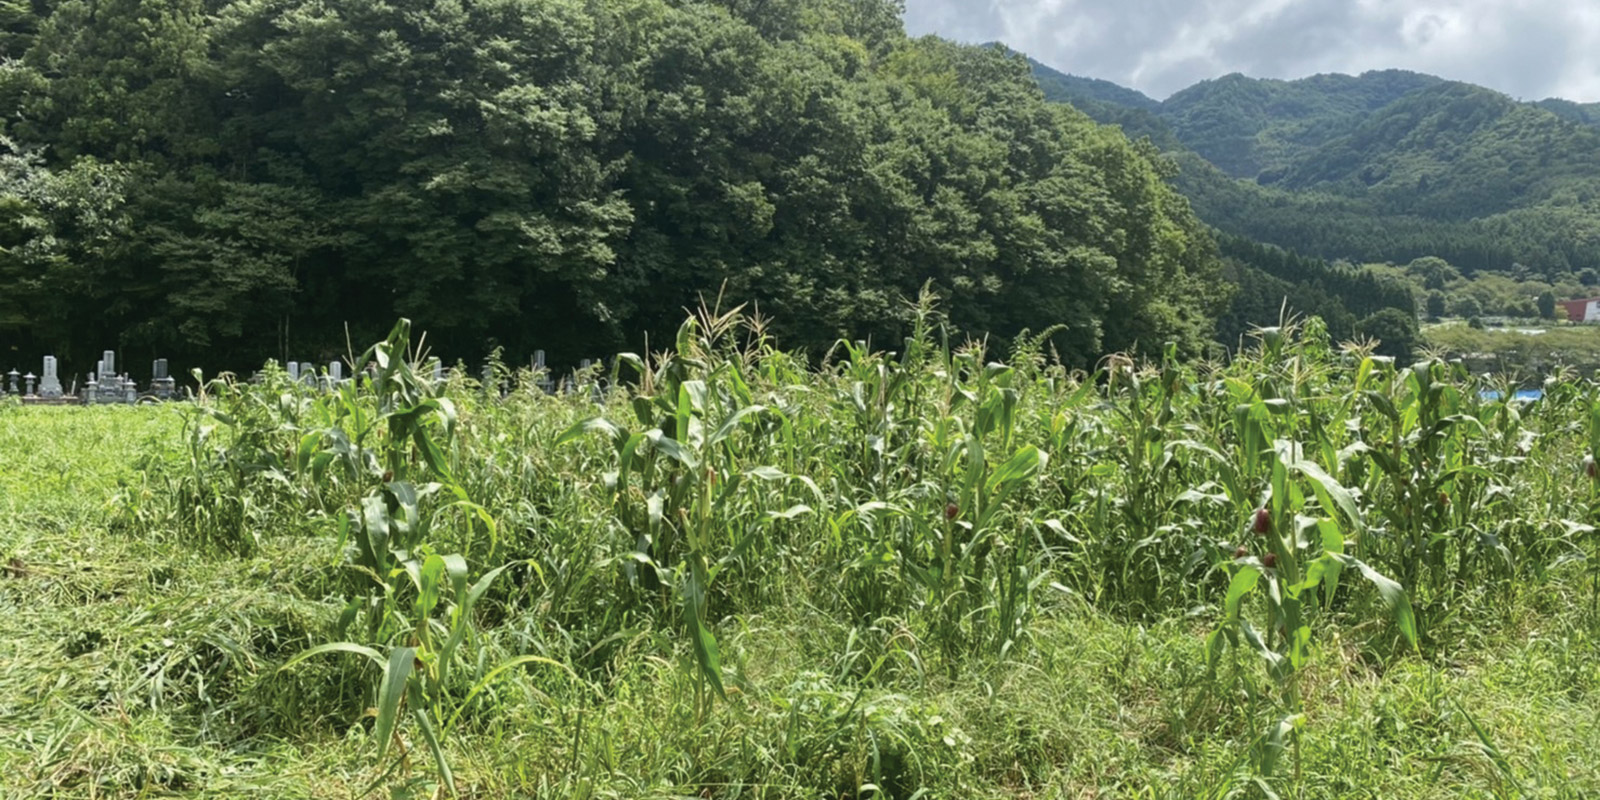 An abandoned field now used for organic corn cultivation by Shinano Soil | Image courtesy of Daytona International